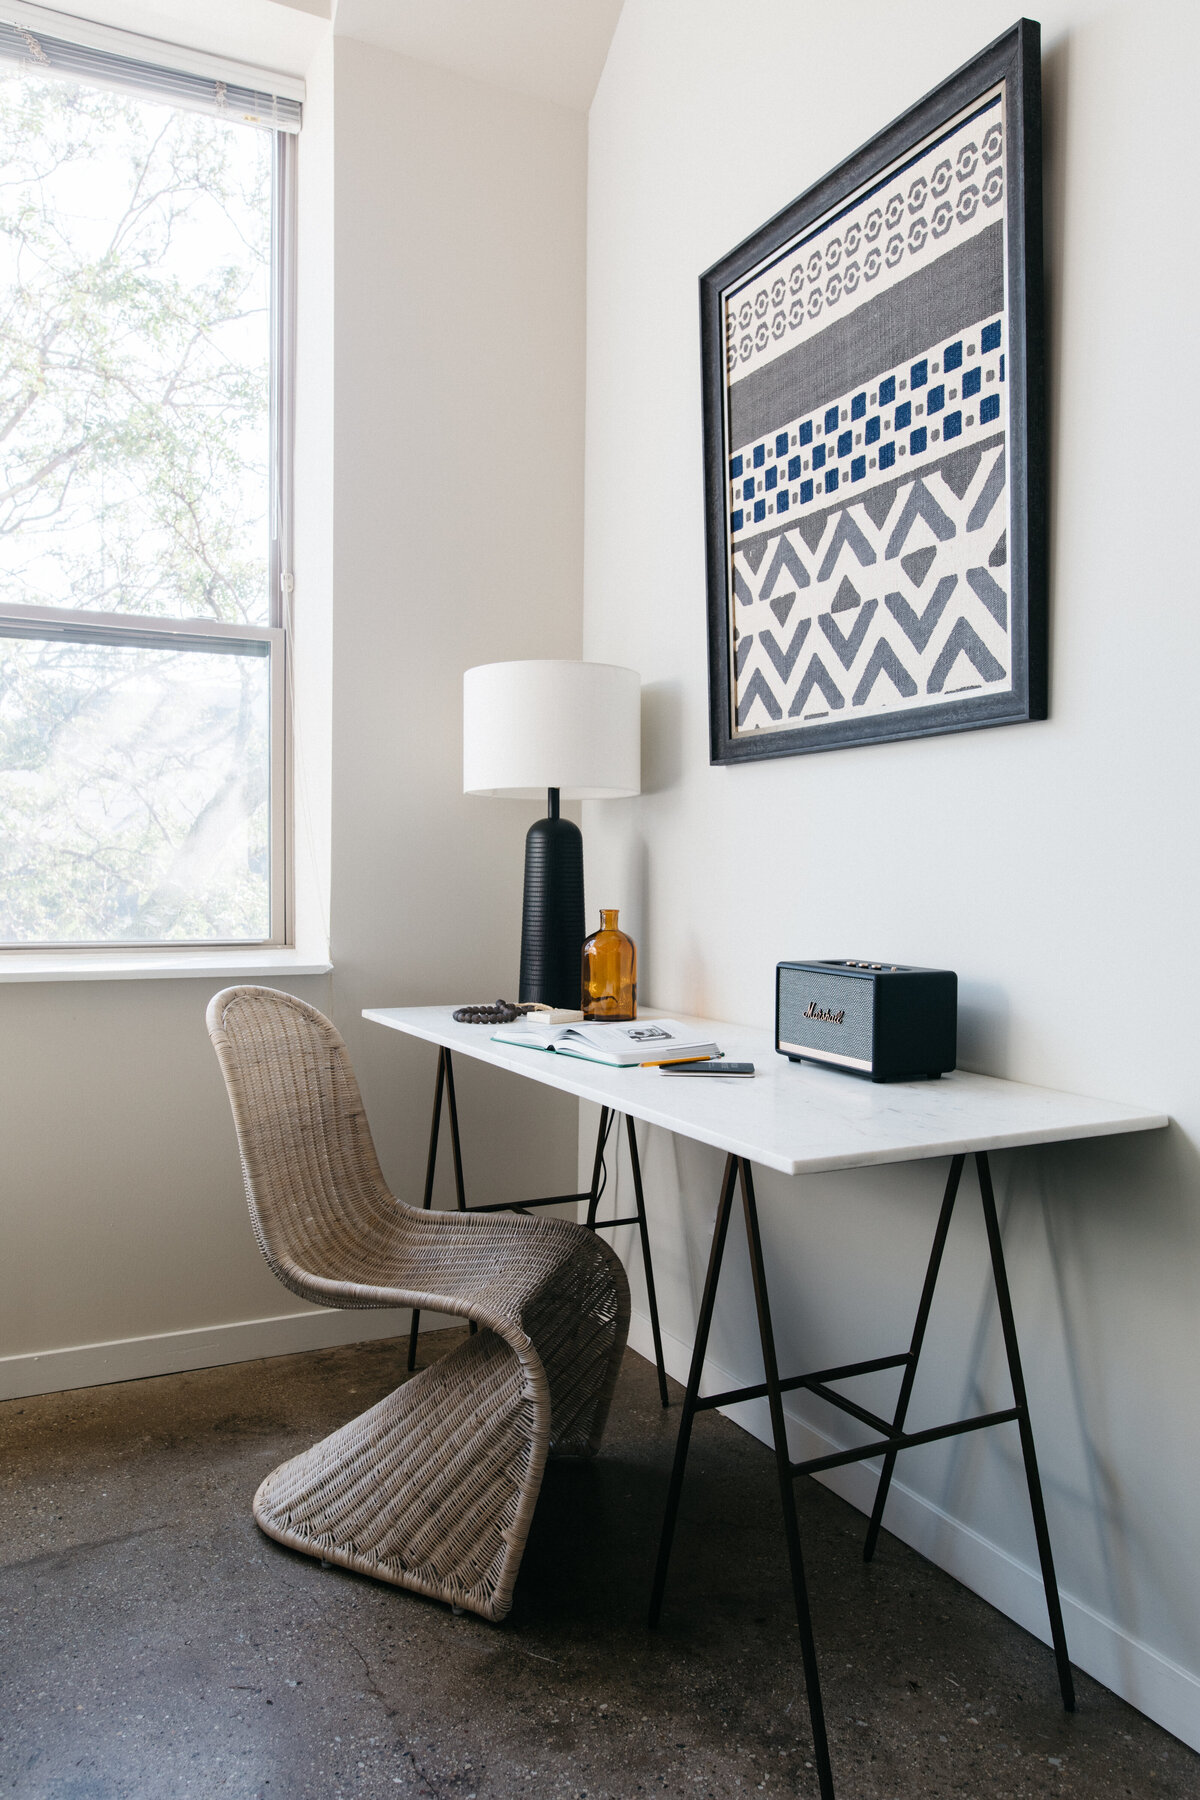 Minimalistic home office with marble trestle table as desk, wicker saarinen style chair, black ceramic table lamp and black and white geometric art on wall